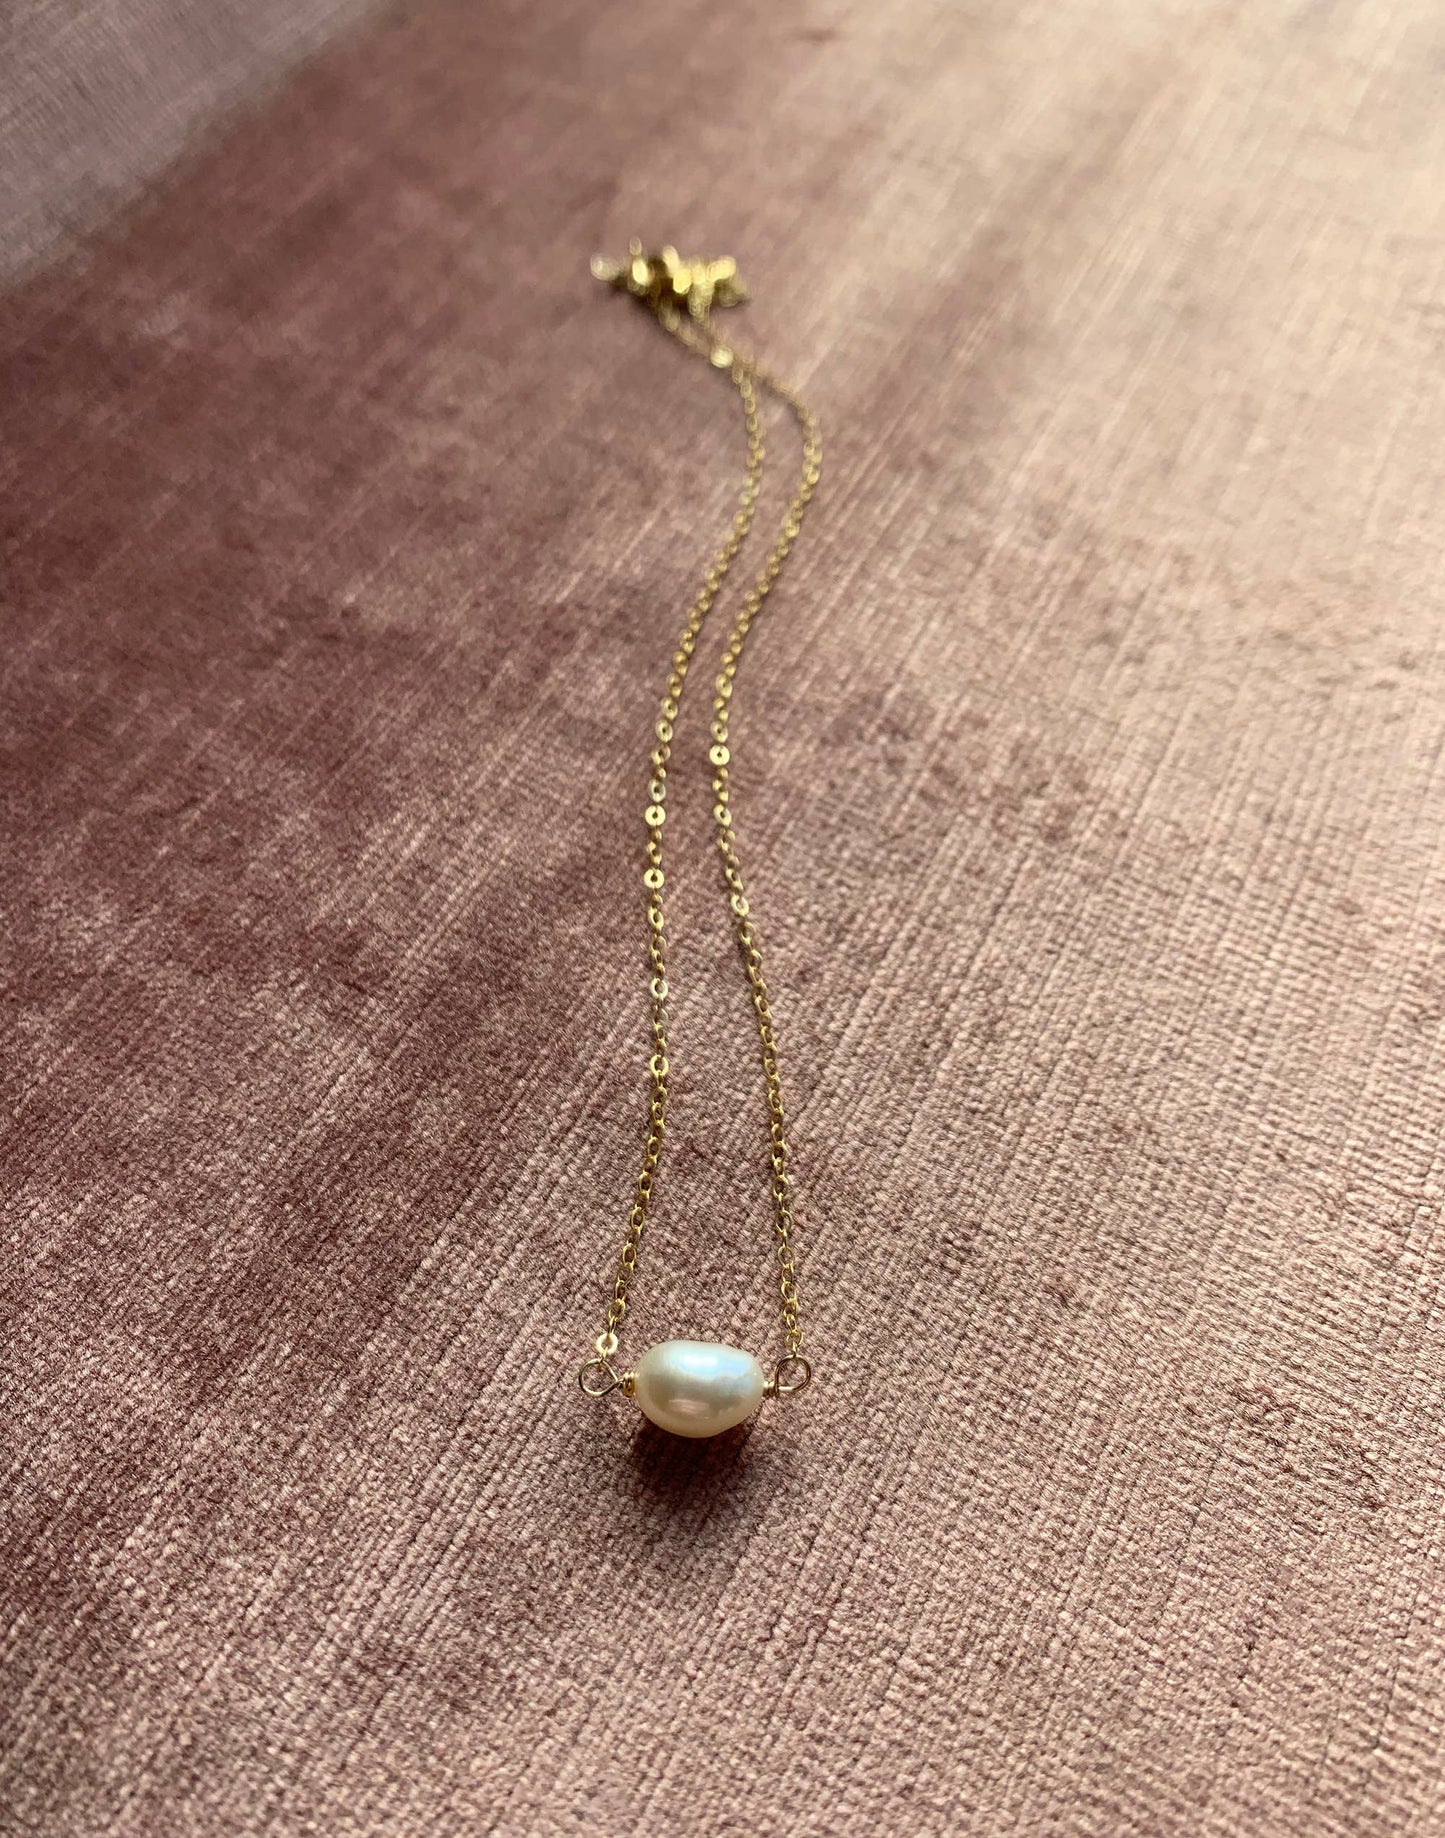 Single Pearl Necklace: 14K Gold Fill